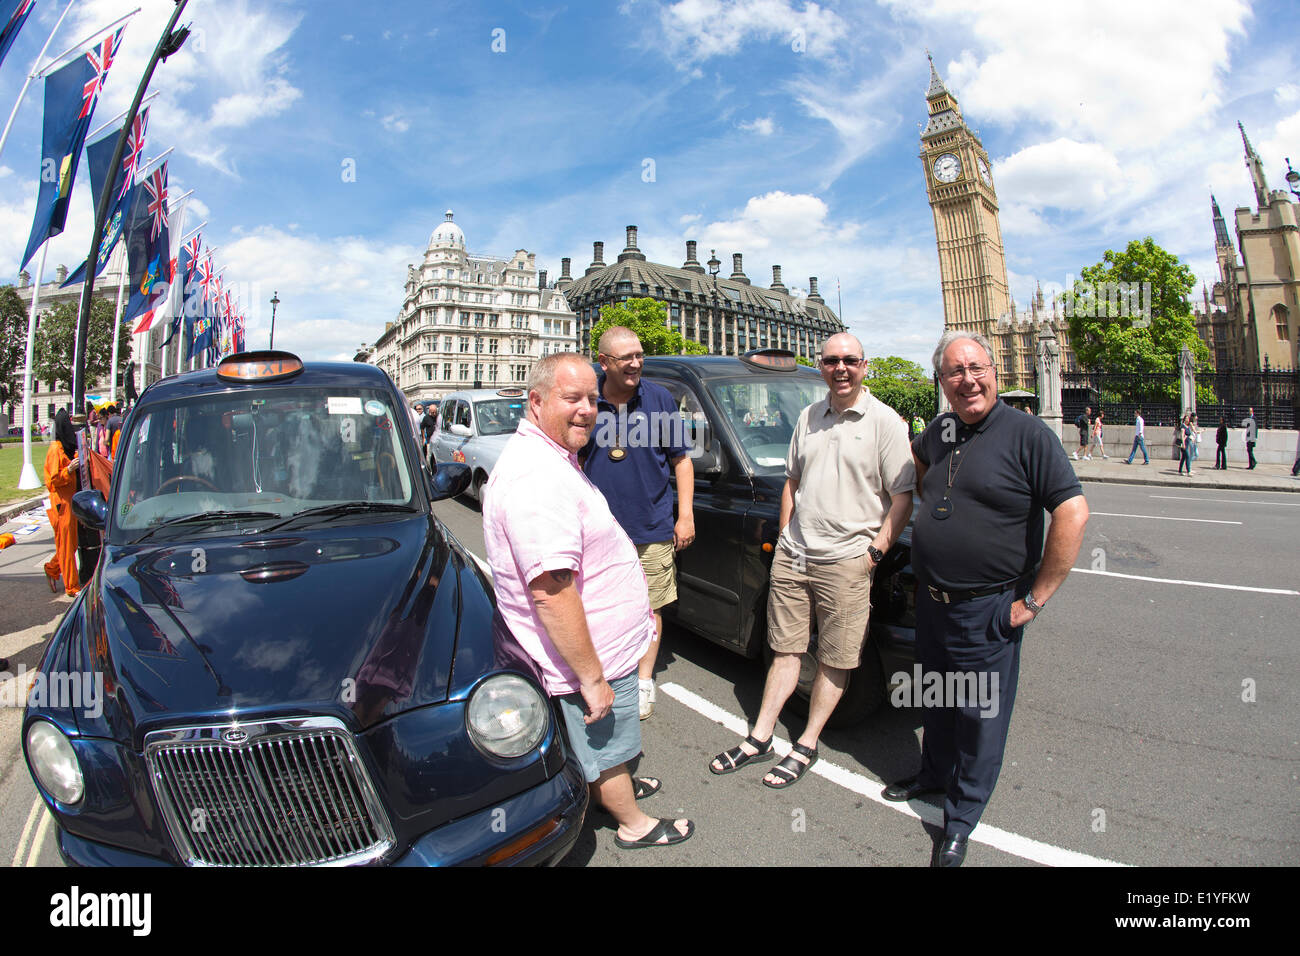 Whitehall, London, UK. 11th June 2014.  Drivers of London black cabs bring traffic to a standstill in the area around Trafalgar Square, the Houses of Parliament and government buildings on Whitehall in a protest against the Uber app-based service Credit:  Clickpics/Alamy Live News Stock Photo